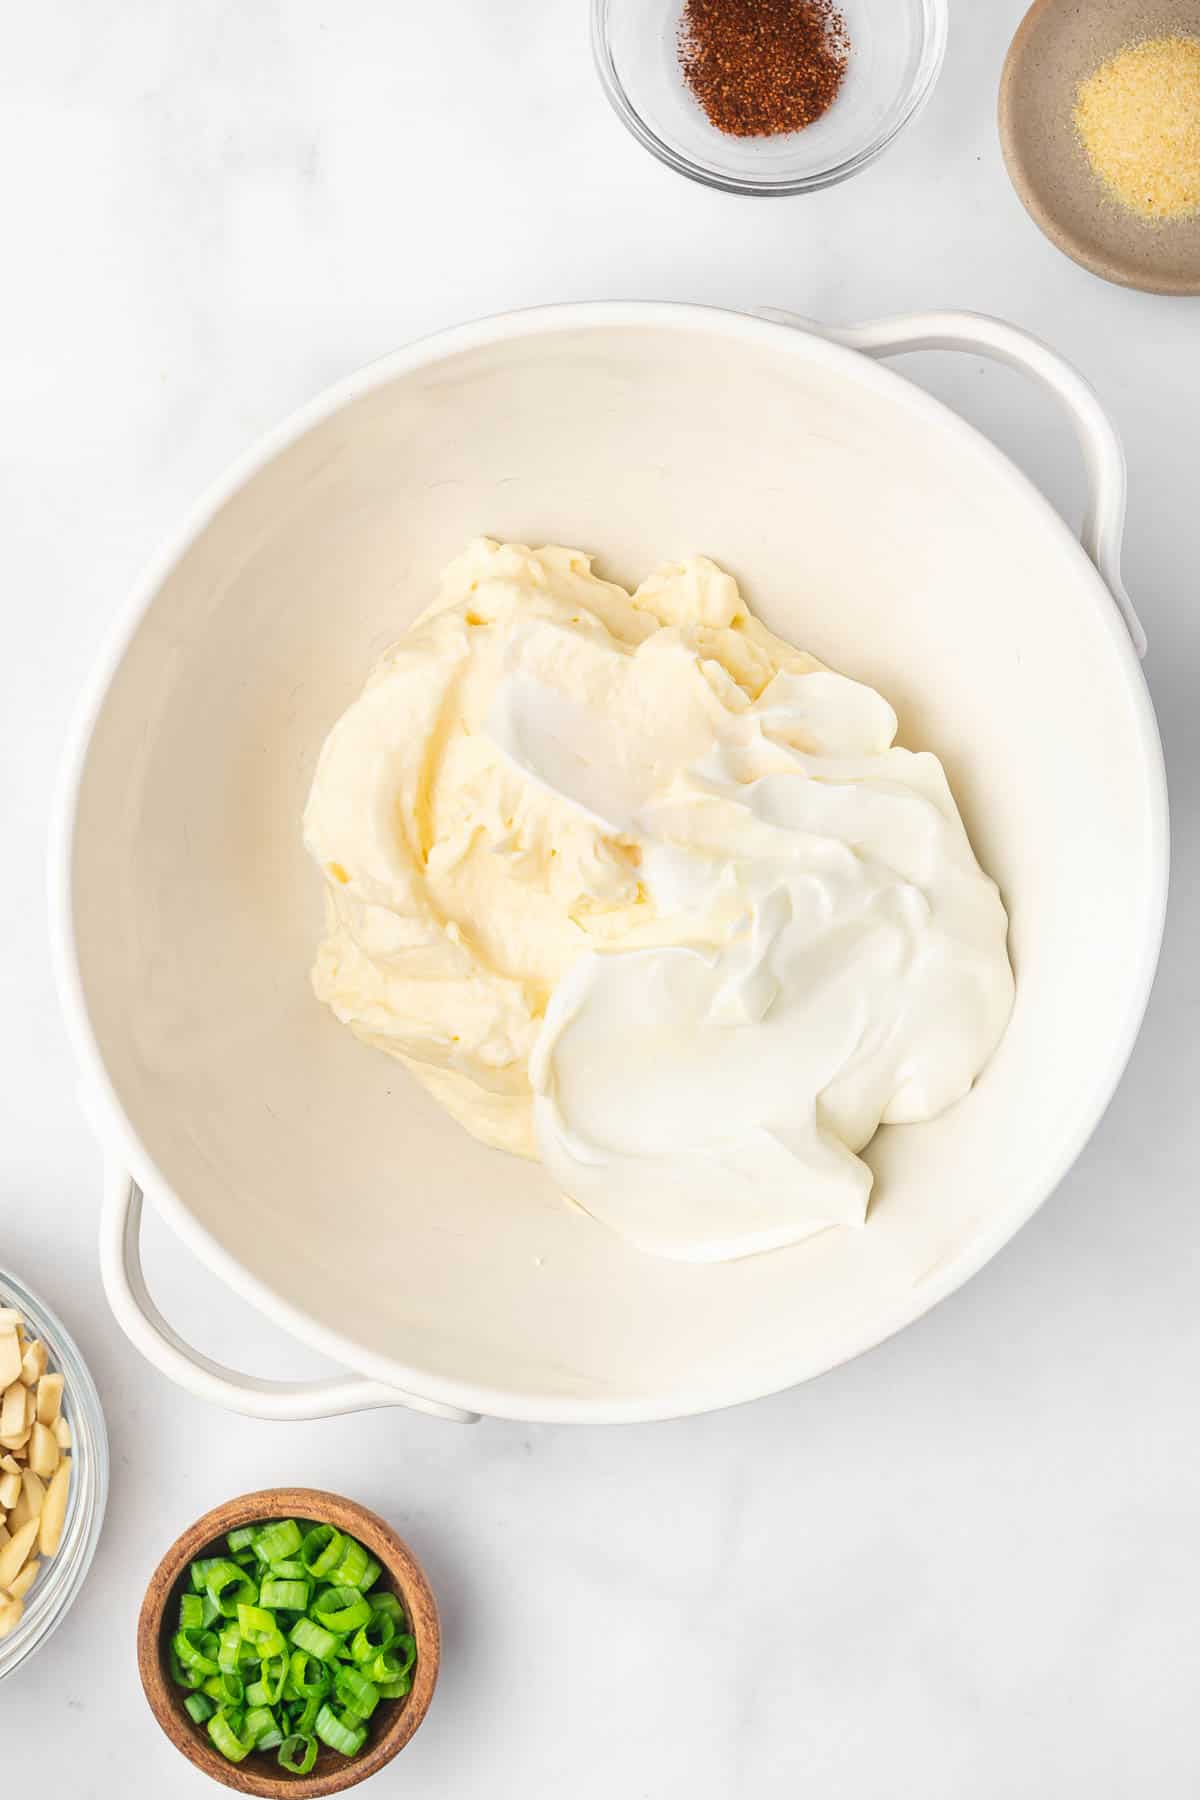 Top view of white bowl with mayonnaise and sour cream in it.